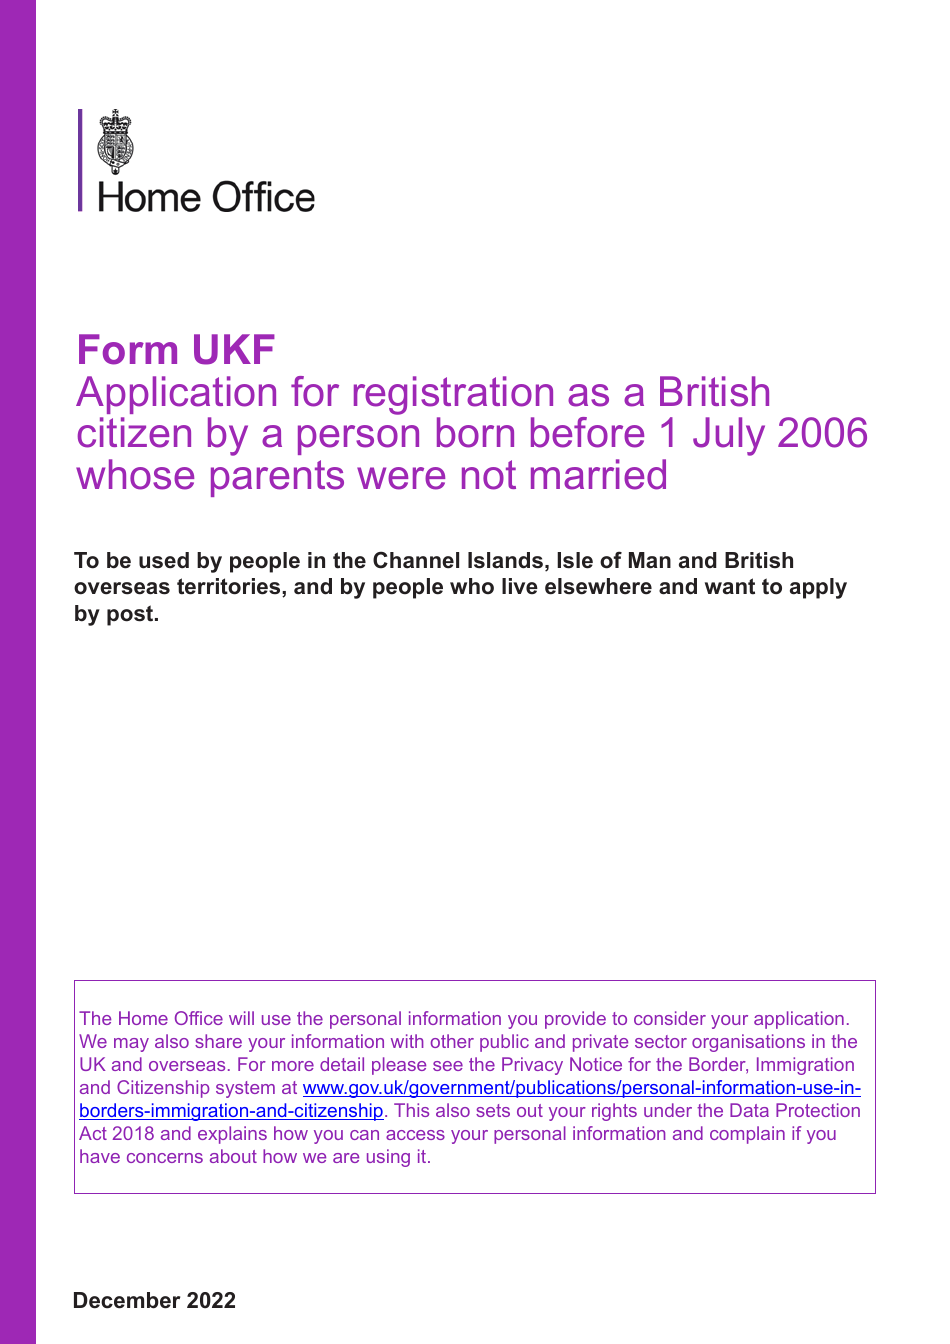 Form UKF Application for Registration as a British Citizen by a Person Born Before 1 July 2006 Whose Parents Were Not Married - United Kingdom, Page 1